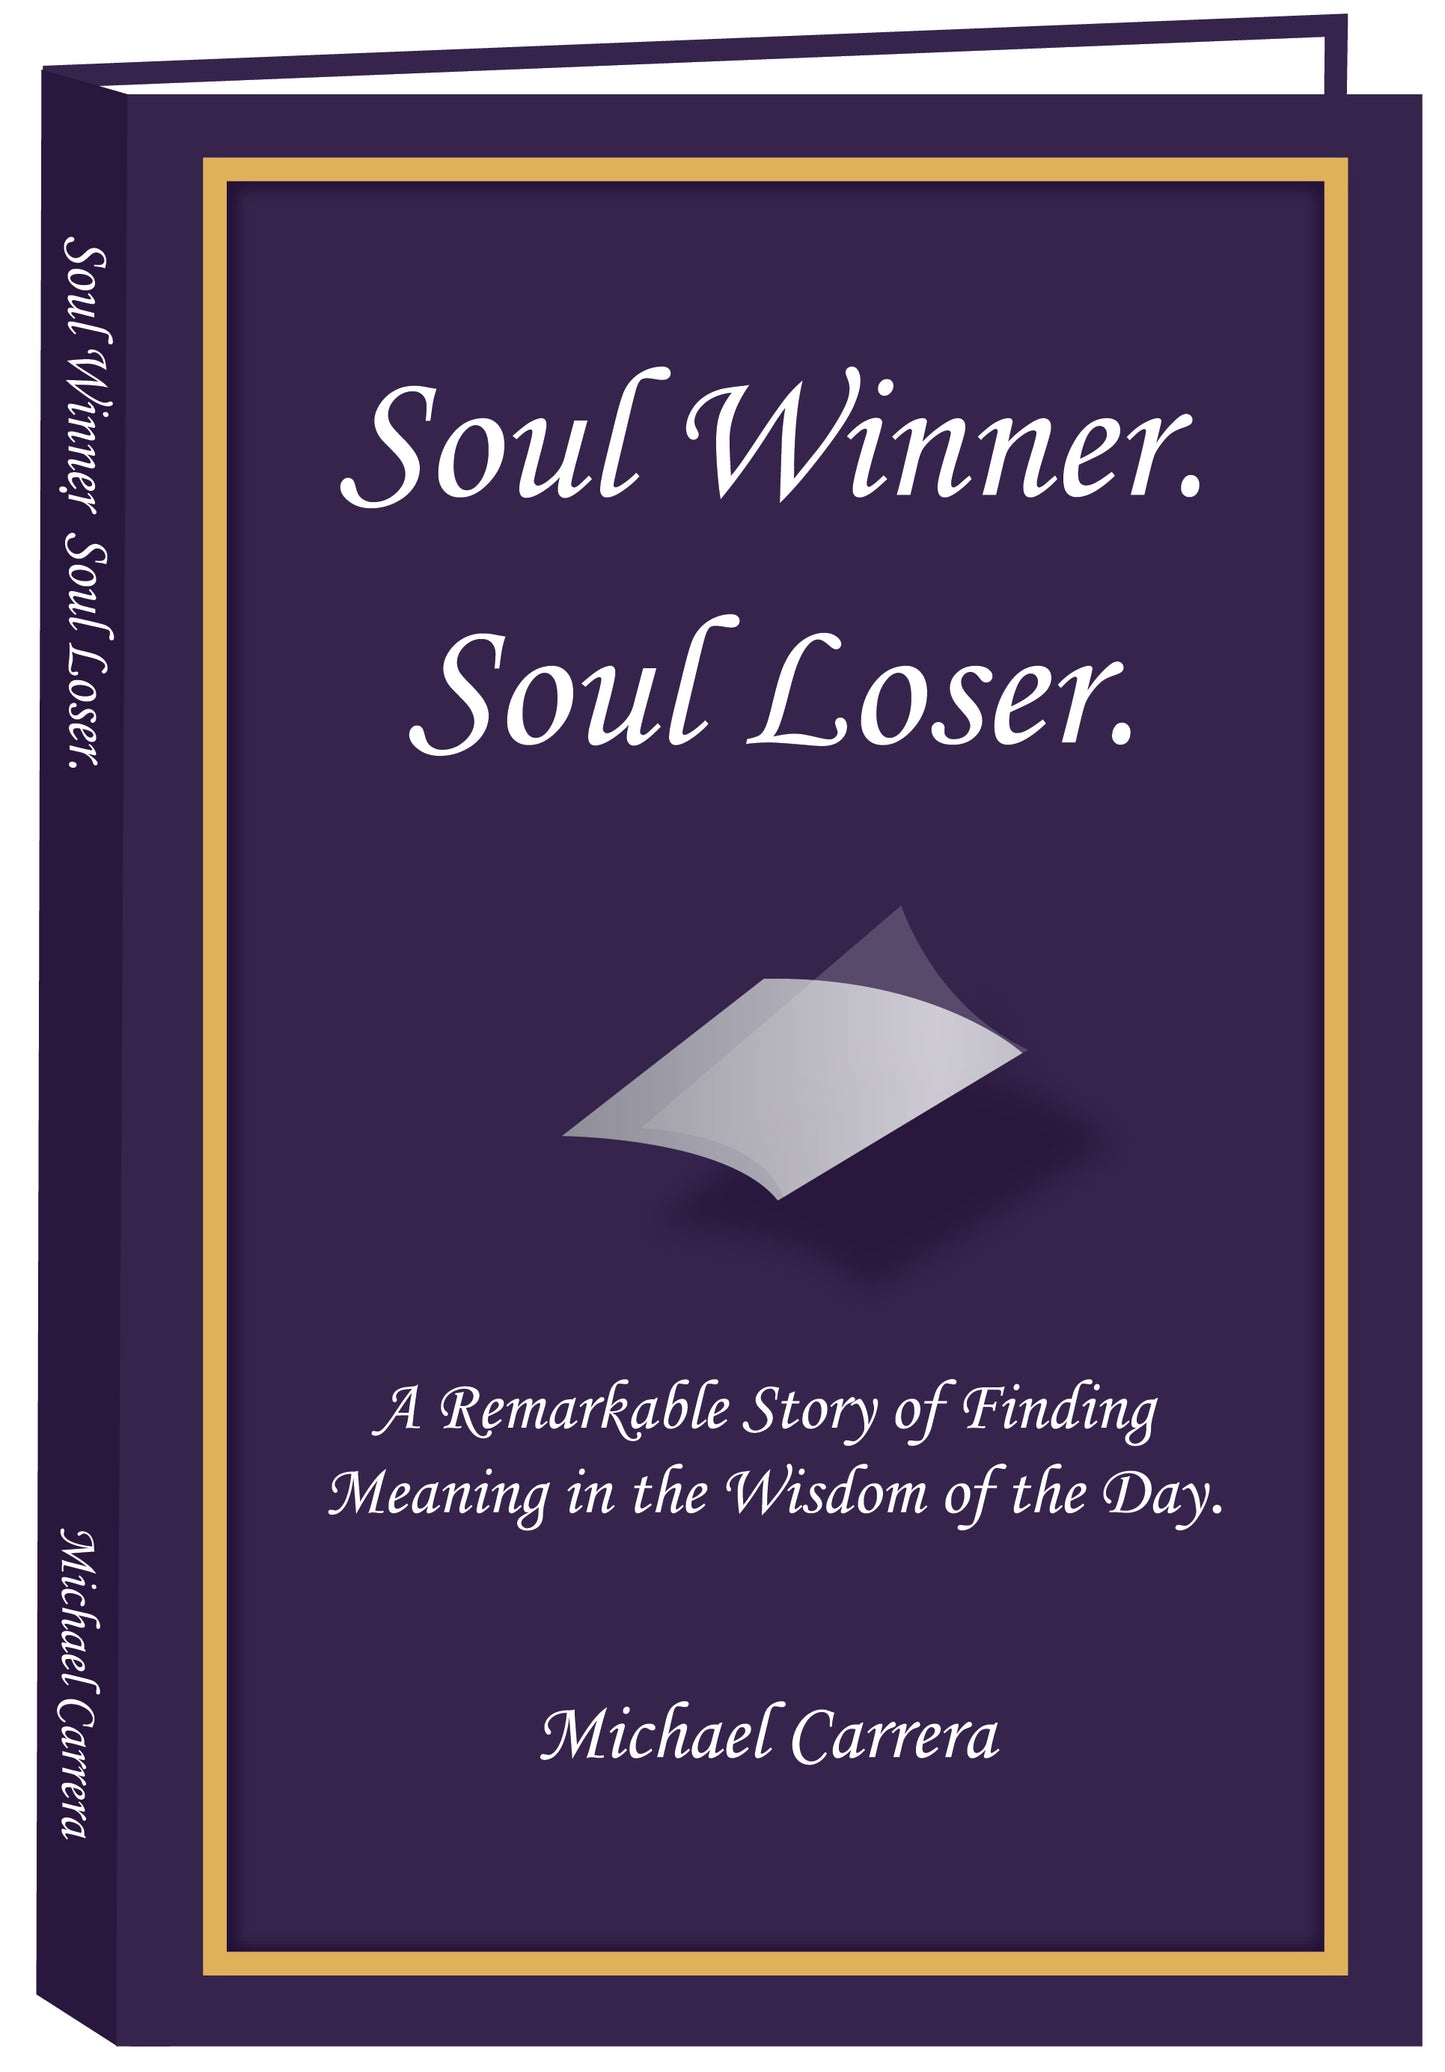 Soul Winner. Soul Loser. A Remarkable Story of Finding Meaning in the Wisdom of the Day